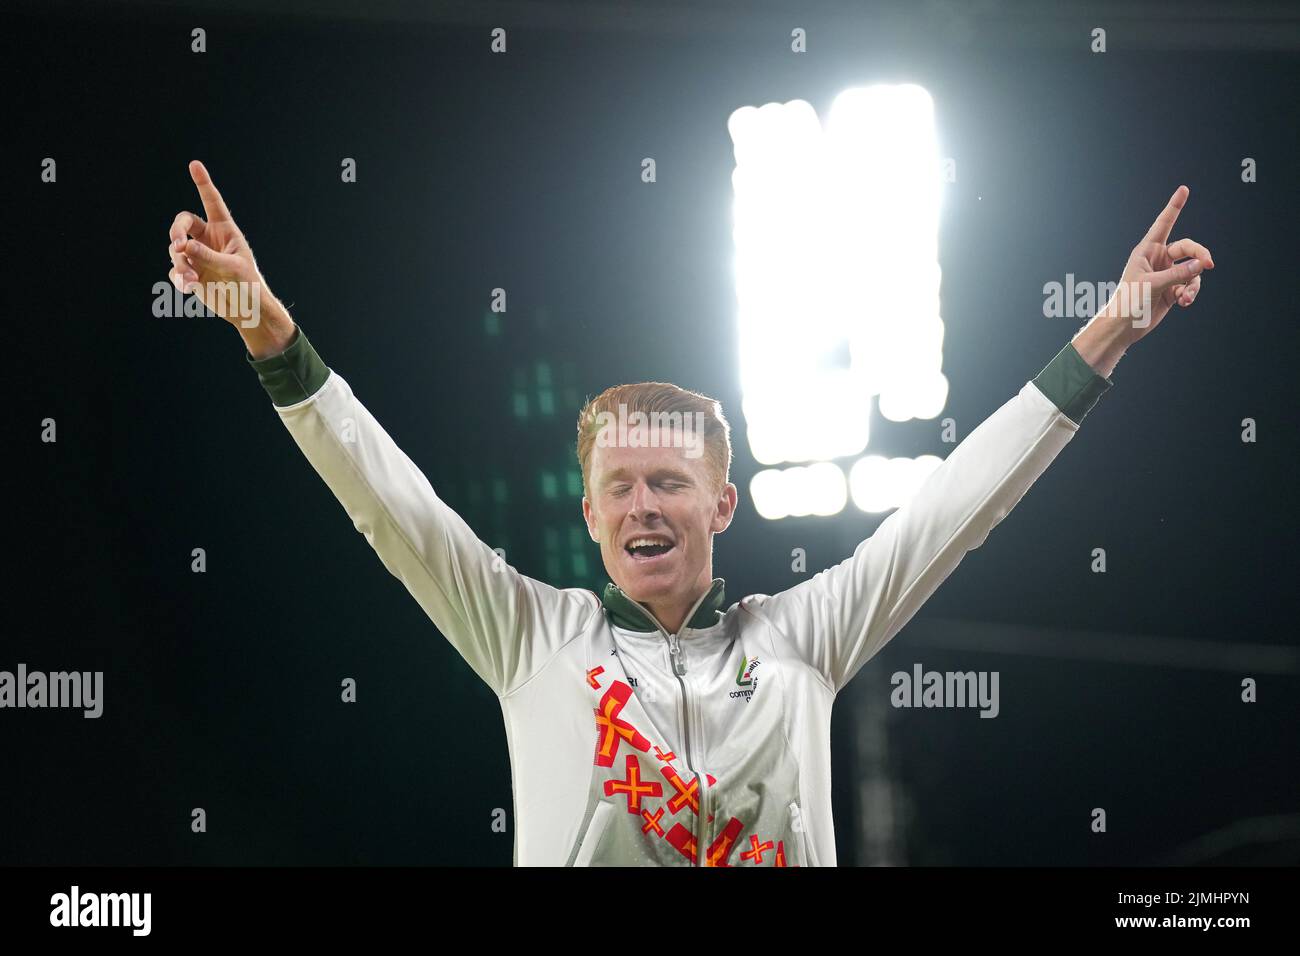 Guernsey's Alastair Chalmers celebrates winning the bronze in the Men's 400m Hurdles Final at Alexander Stadium on day nine of the 2022 Commonwealth Games in Birmingham. Picture date: Saturday August 6, 2022. Stock Photo